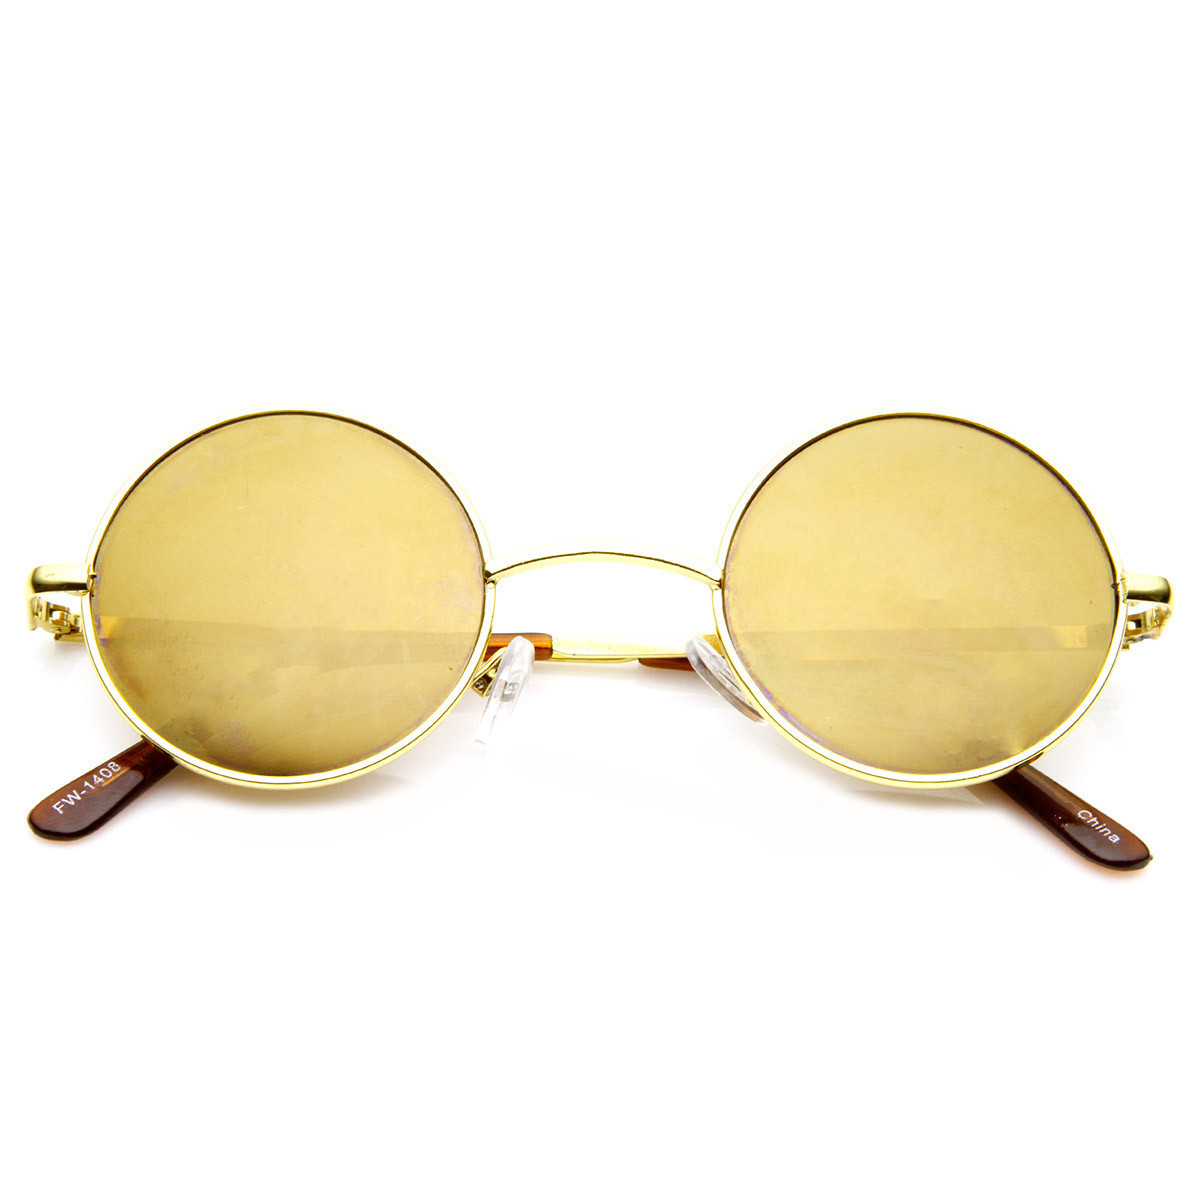 Lennon Style Round Circle Metal Sunglasses With Color Mirror Lens - 1408 - Gold Gold-Mirror